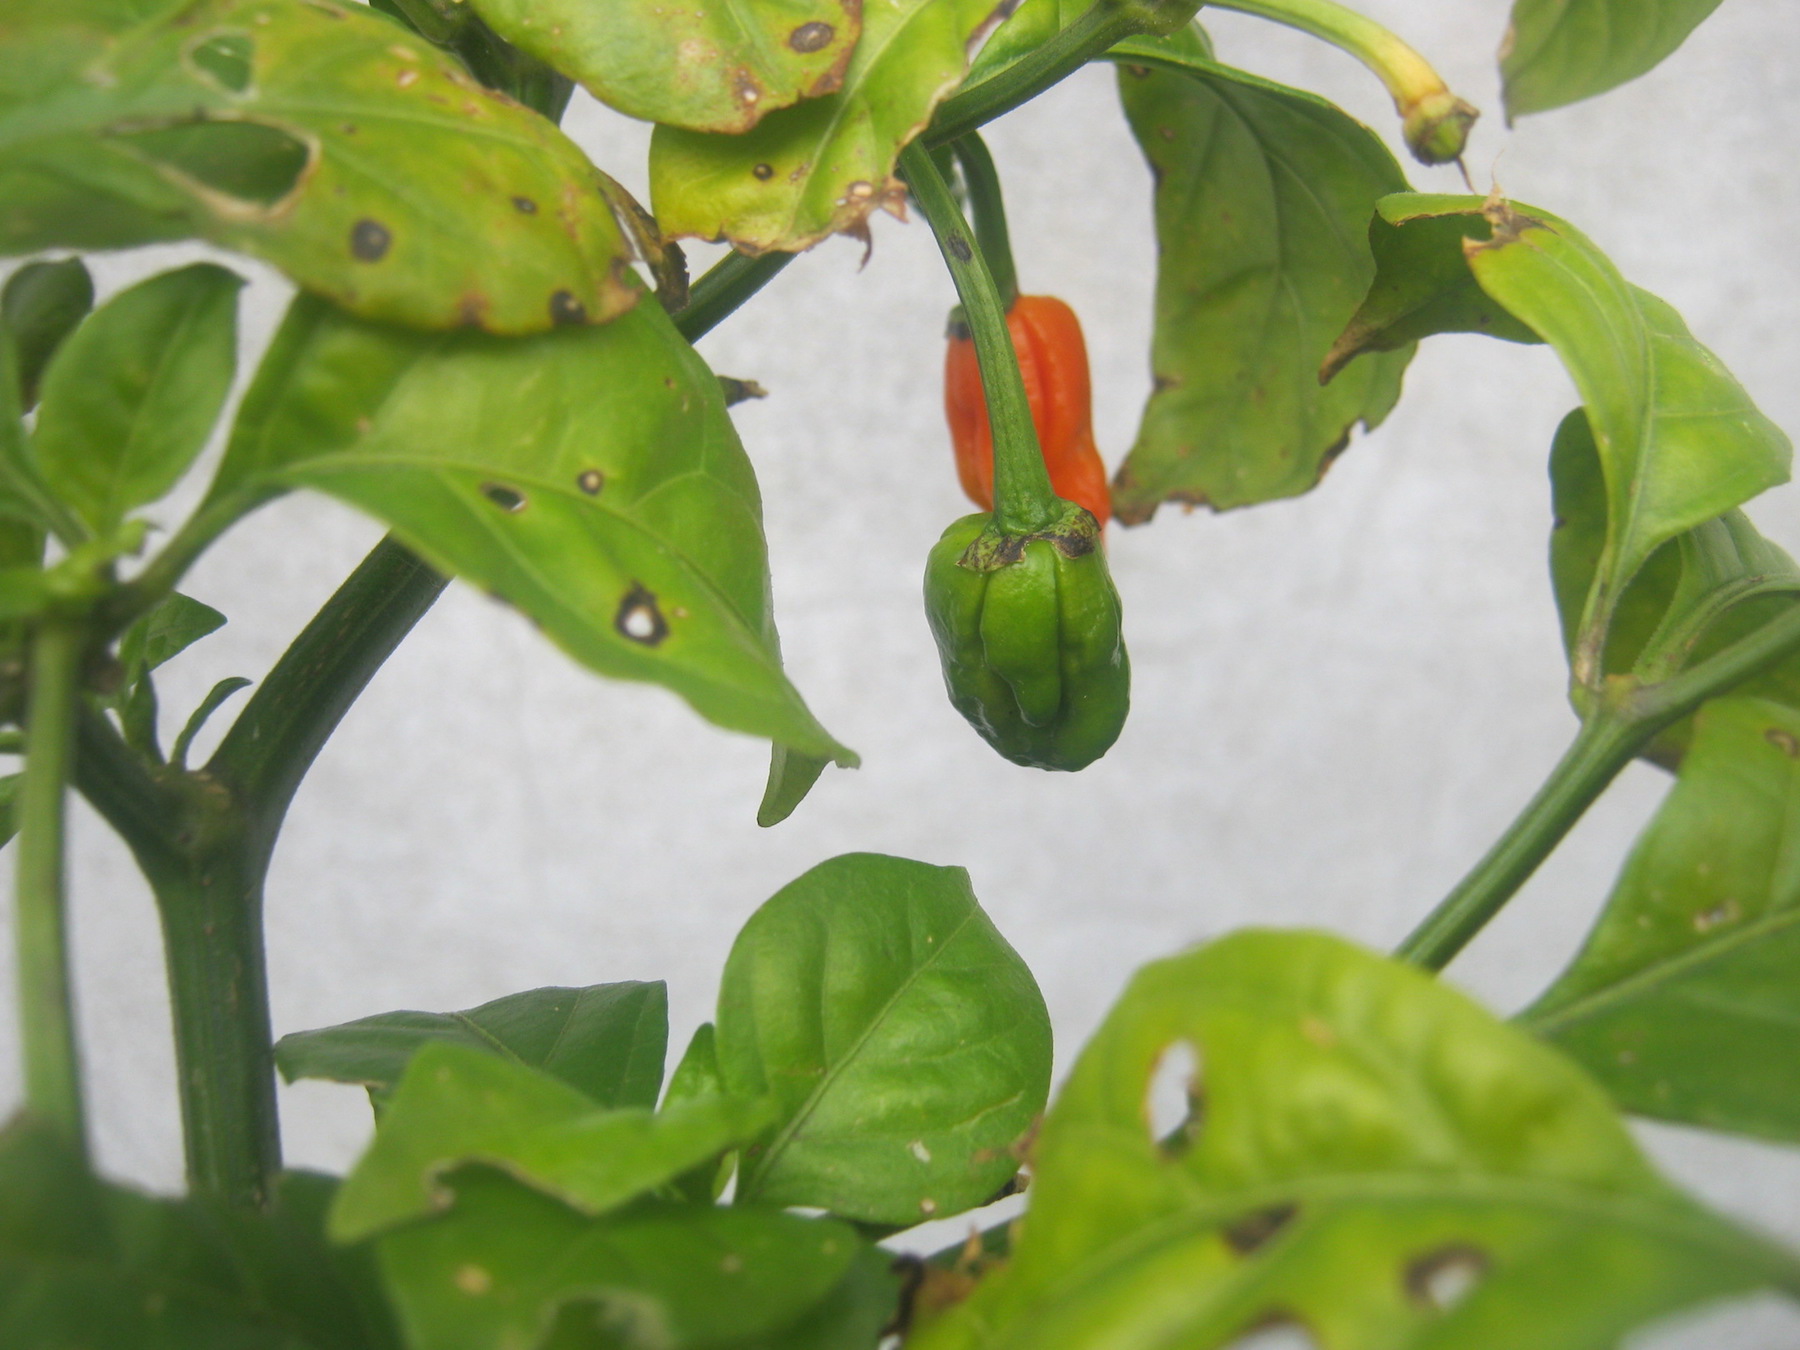 Tiny Carolina Reaper pods on plant just before Winter pruning